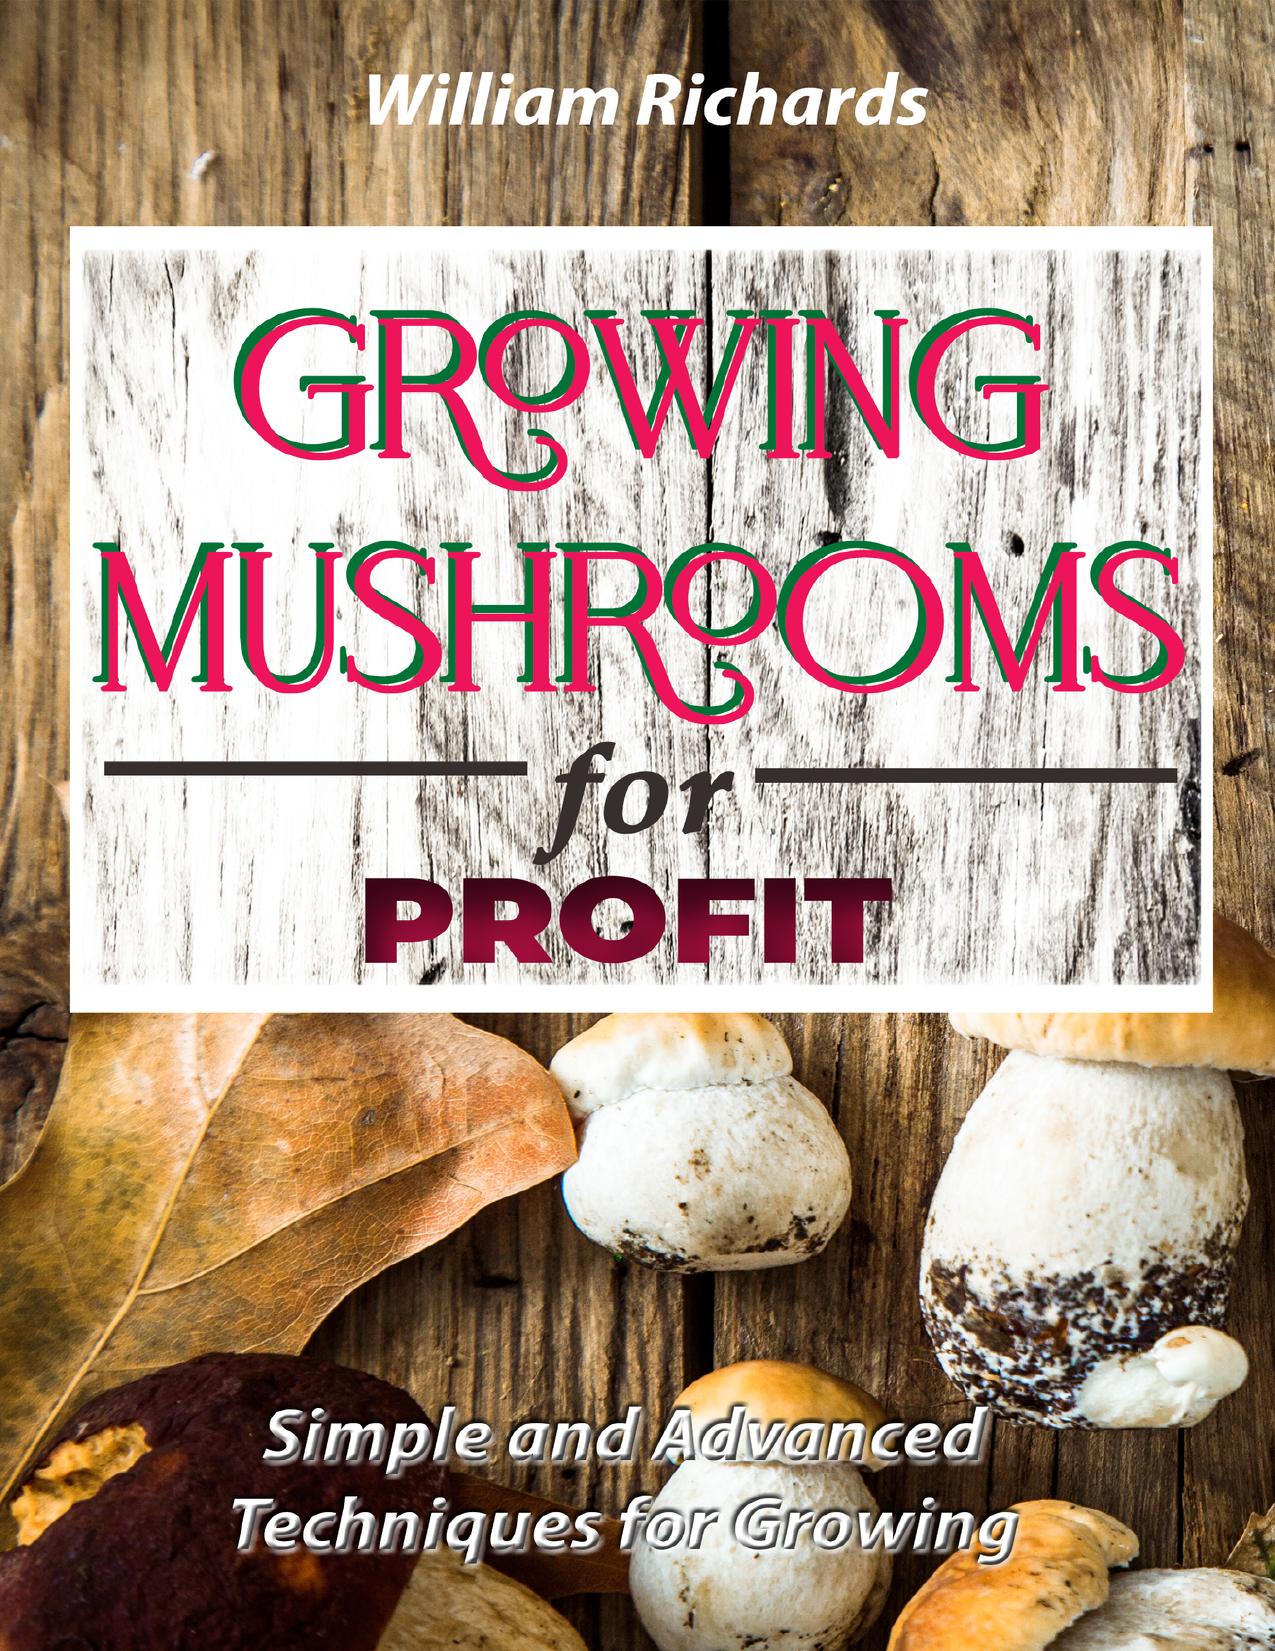 GROWING MUSHROOMS for PROFIT: Simple and Advanced Techniques for Growing by Richards William